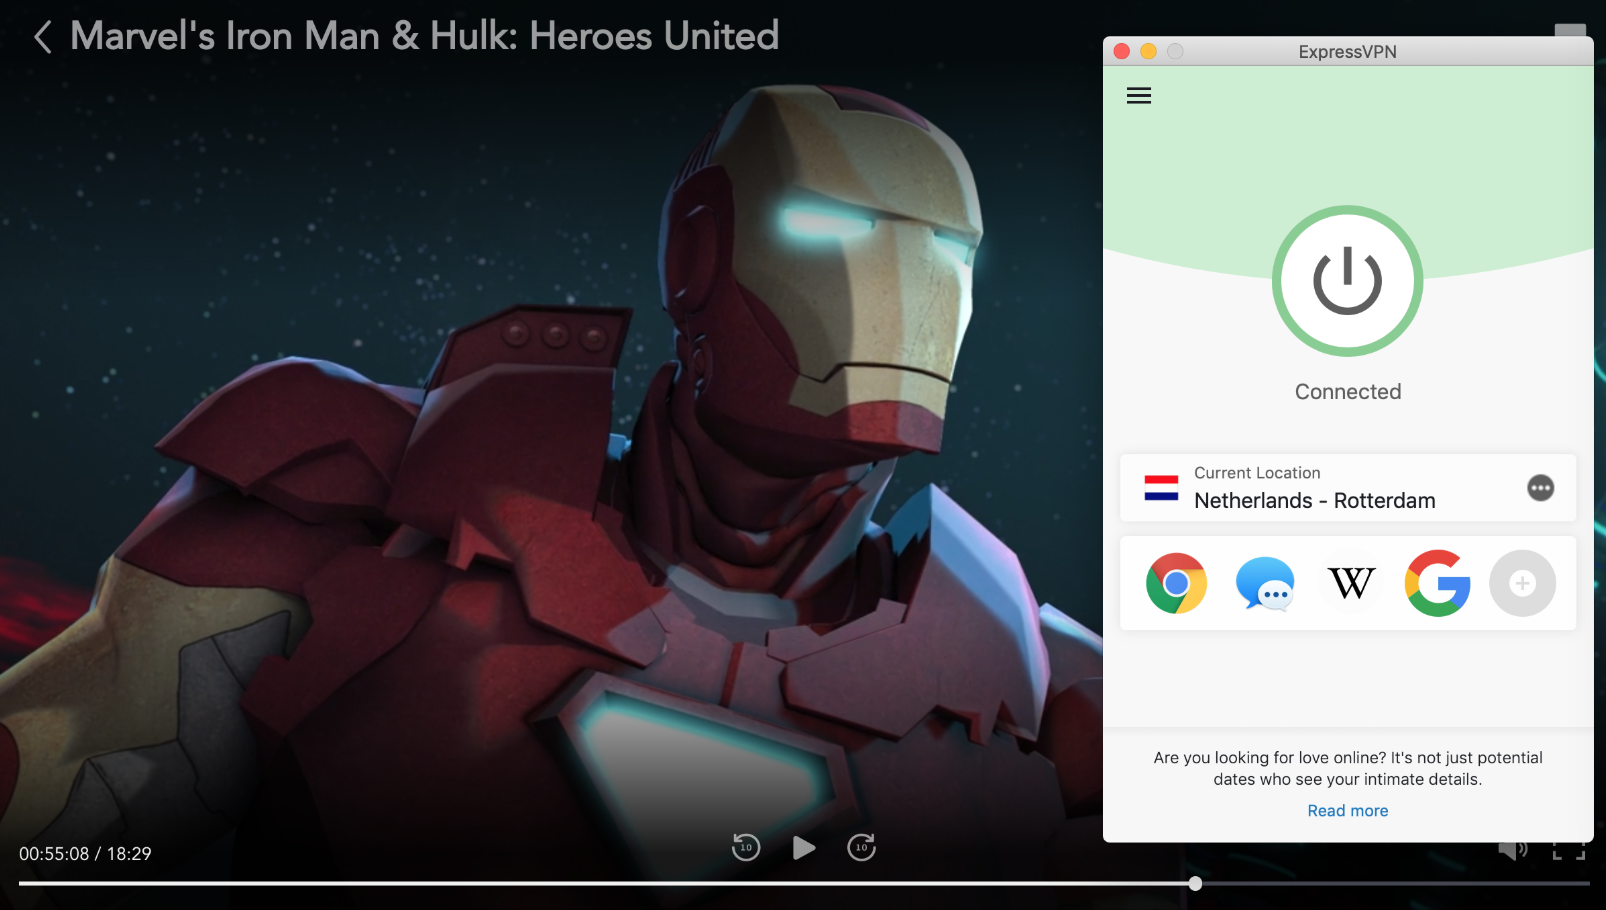 How To Watch Iron Man And Hulk Heroes United On Disney Plus